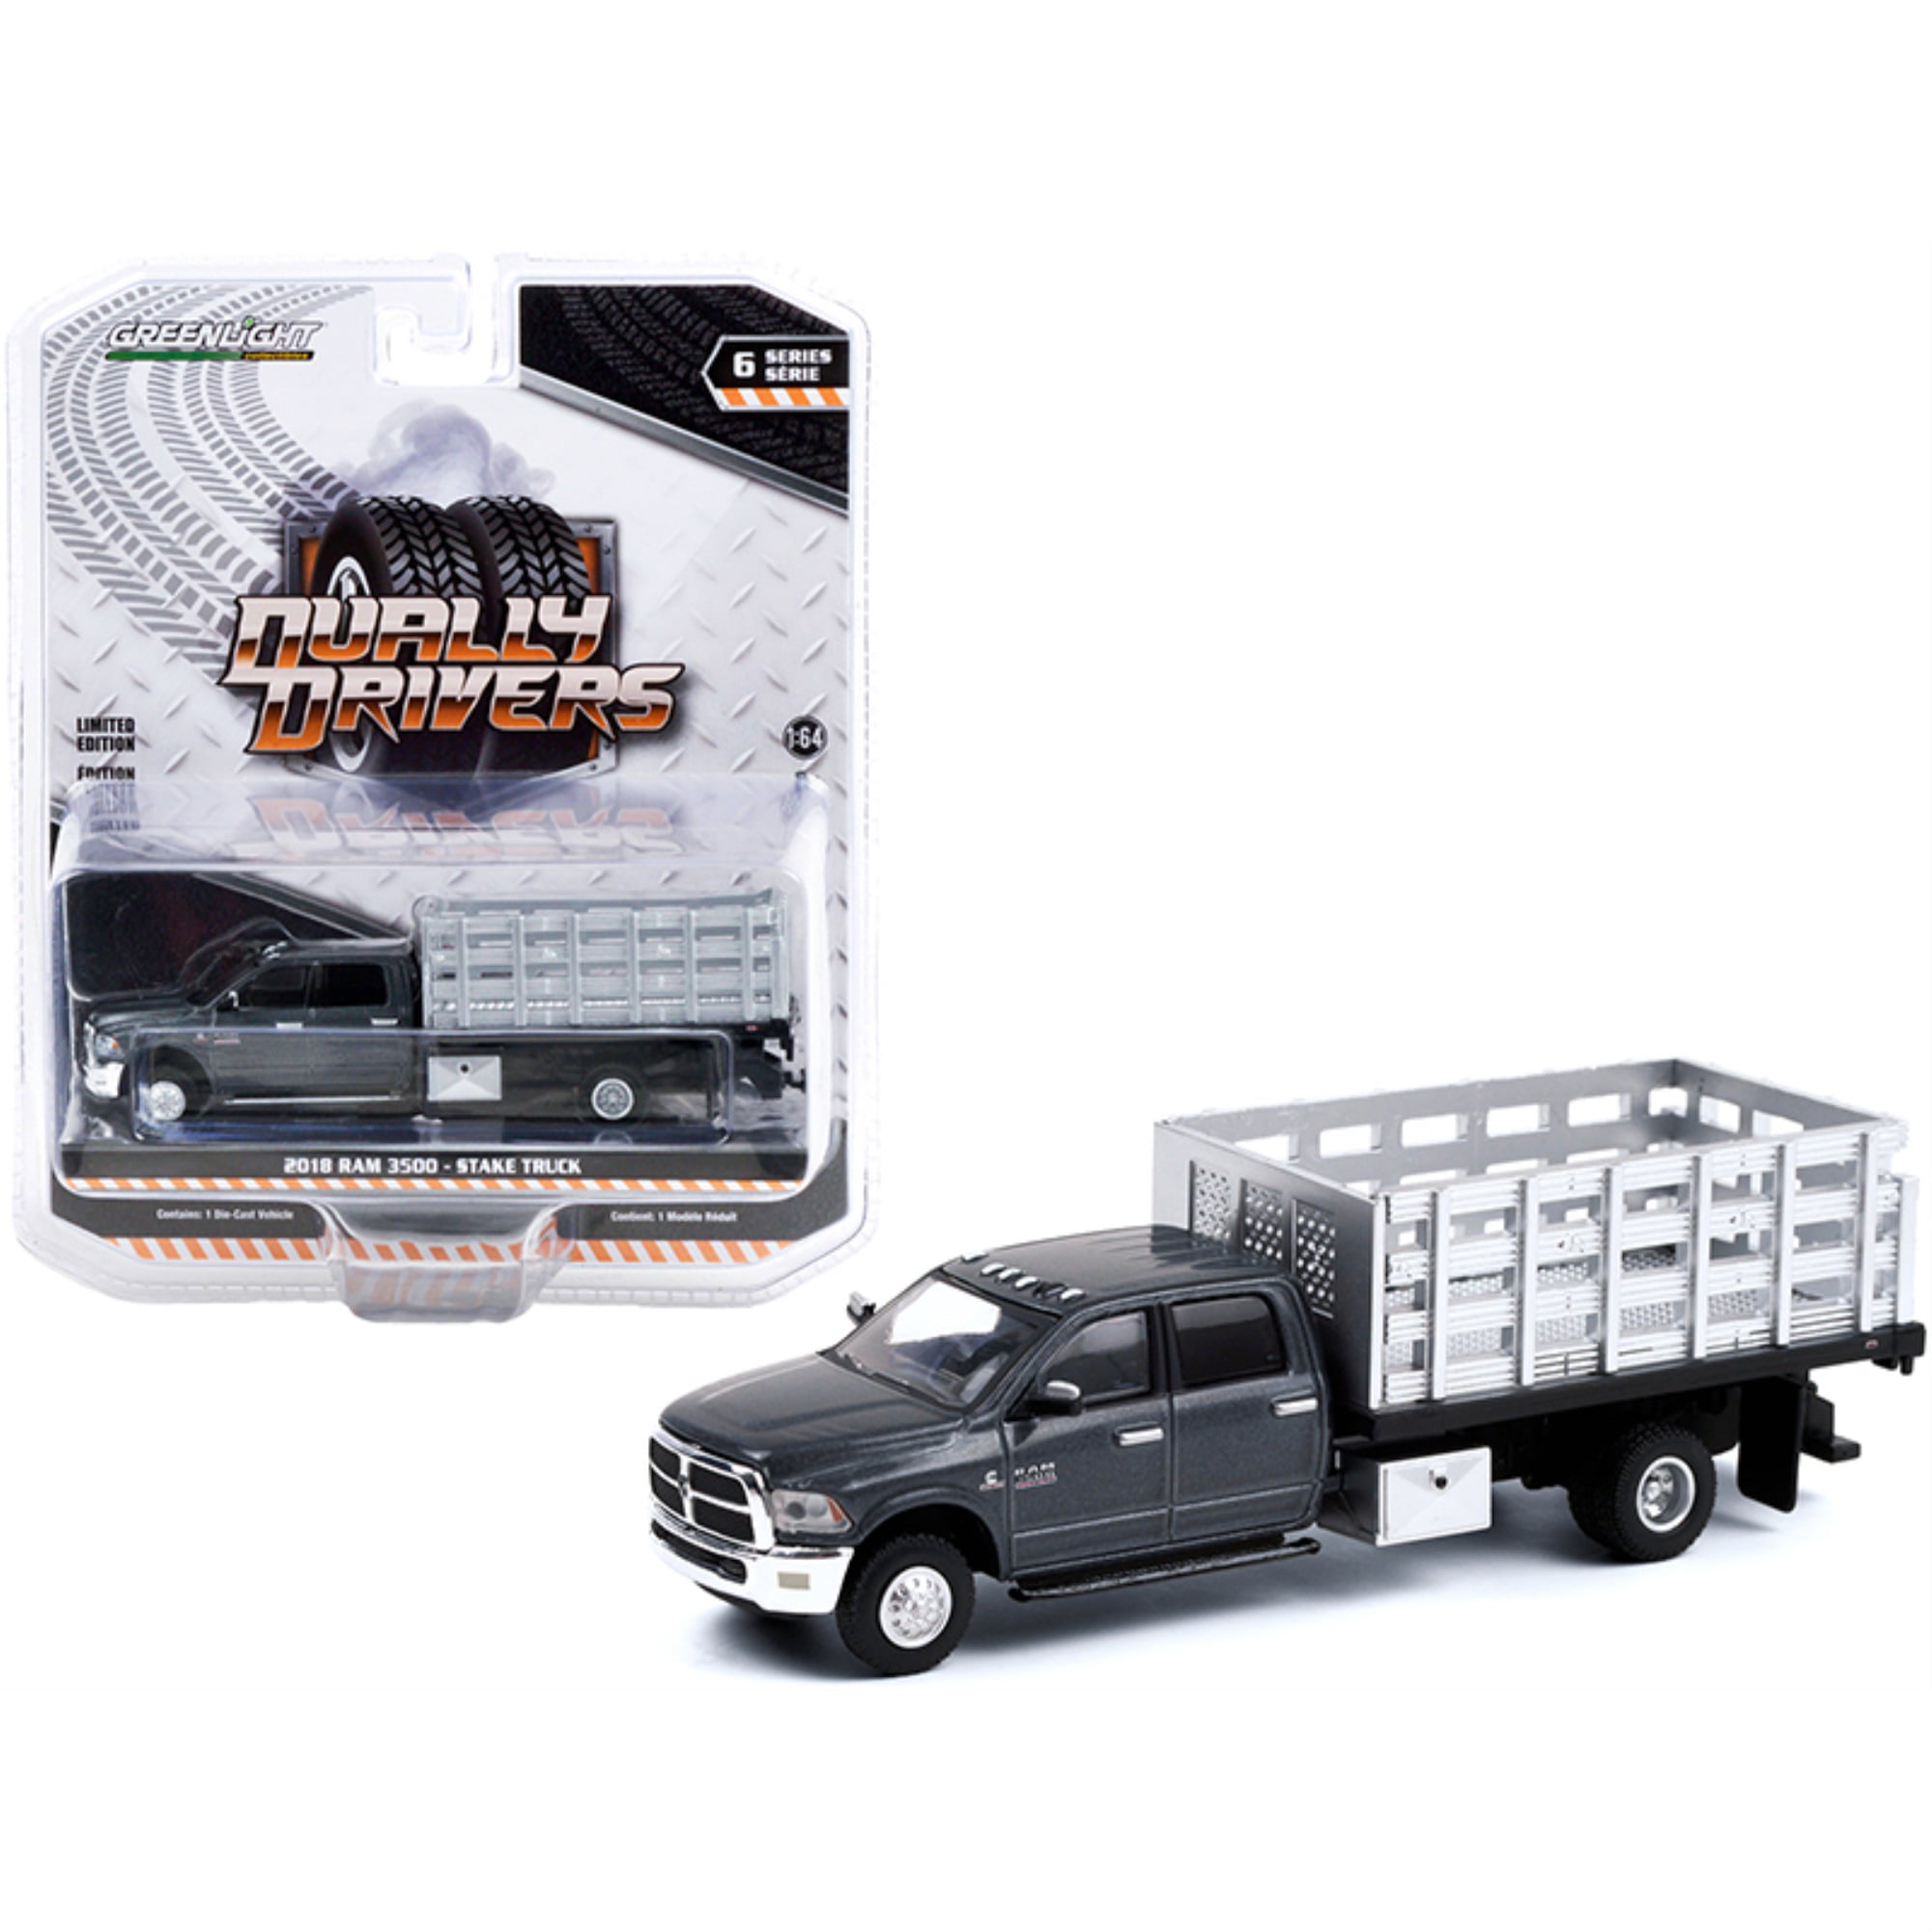 1/64 Greenlight 2018 RAM 3500 Stake Truck Chase Version for sale online 